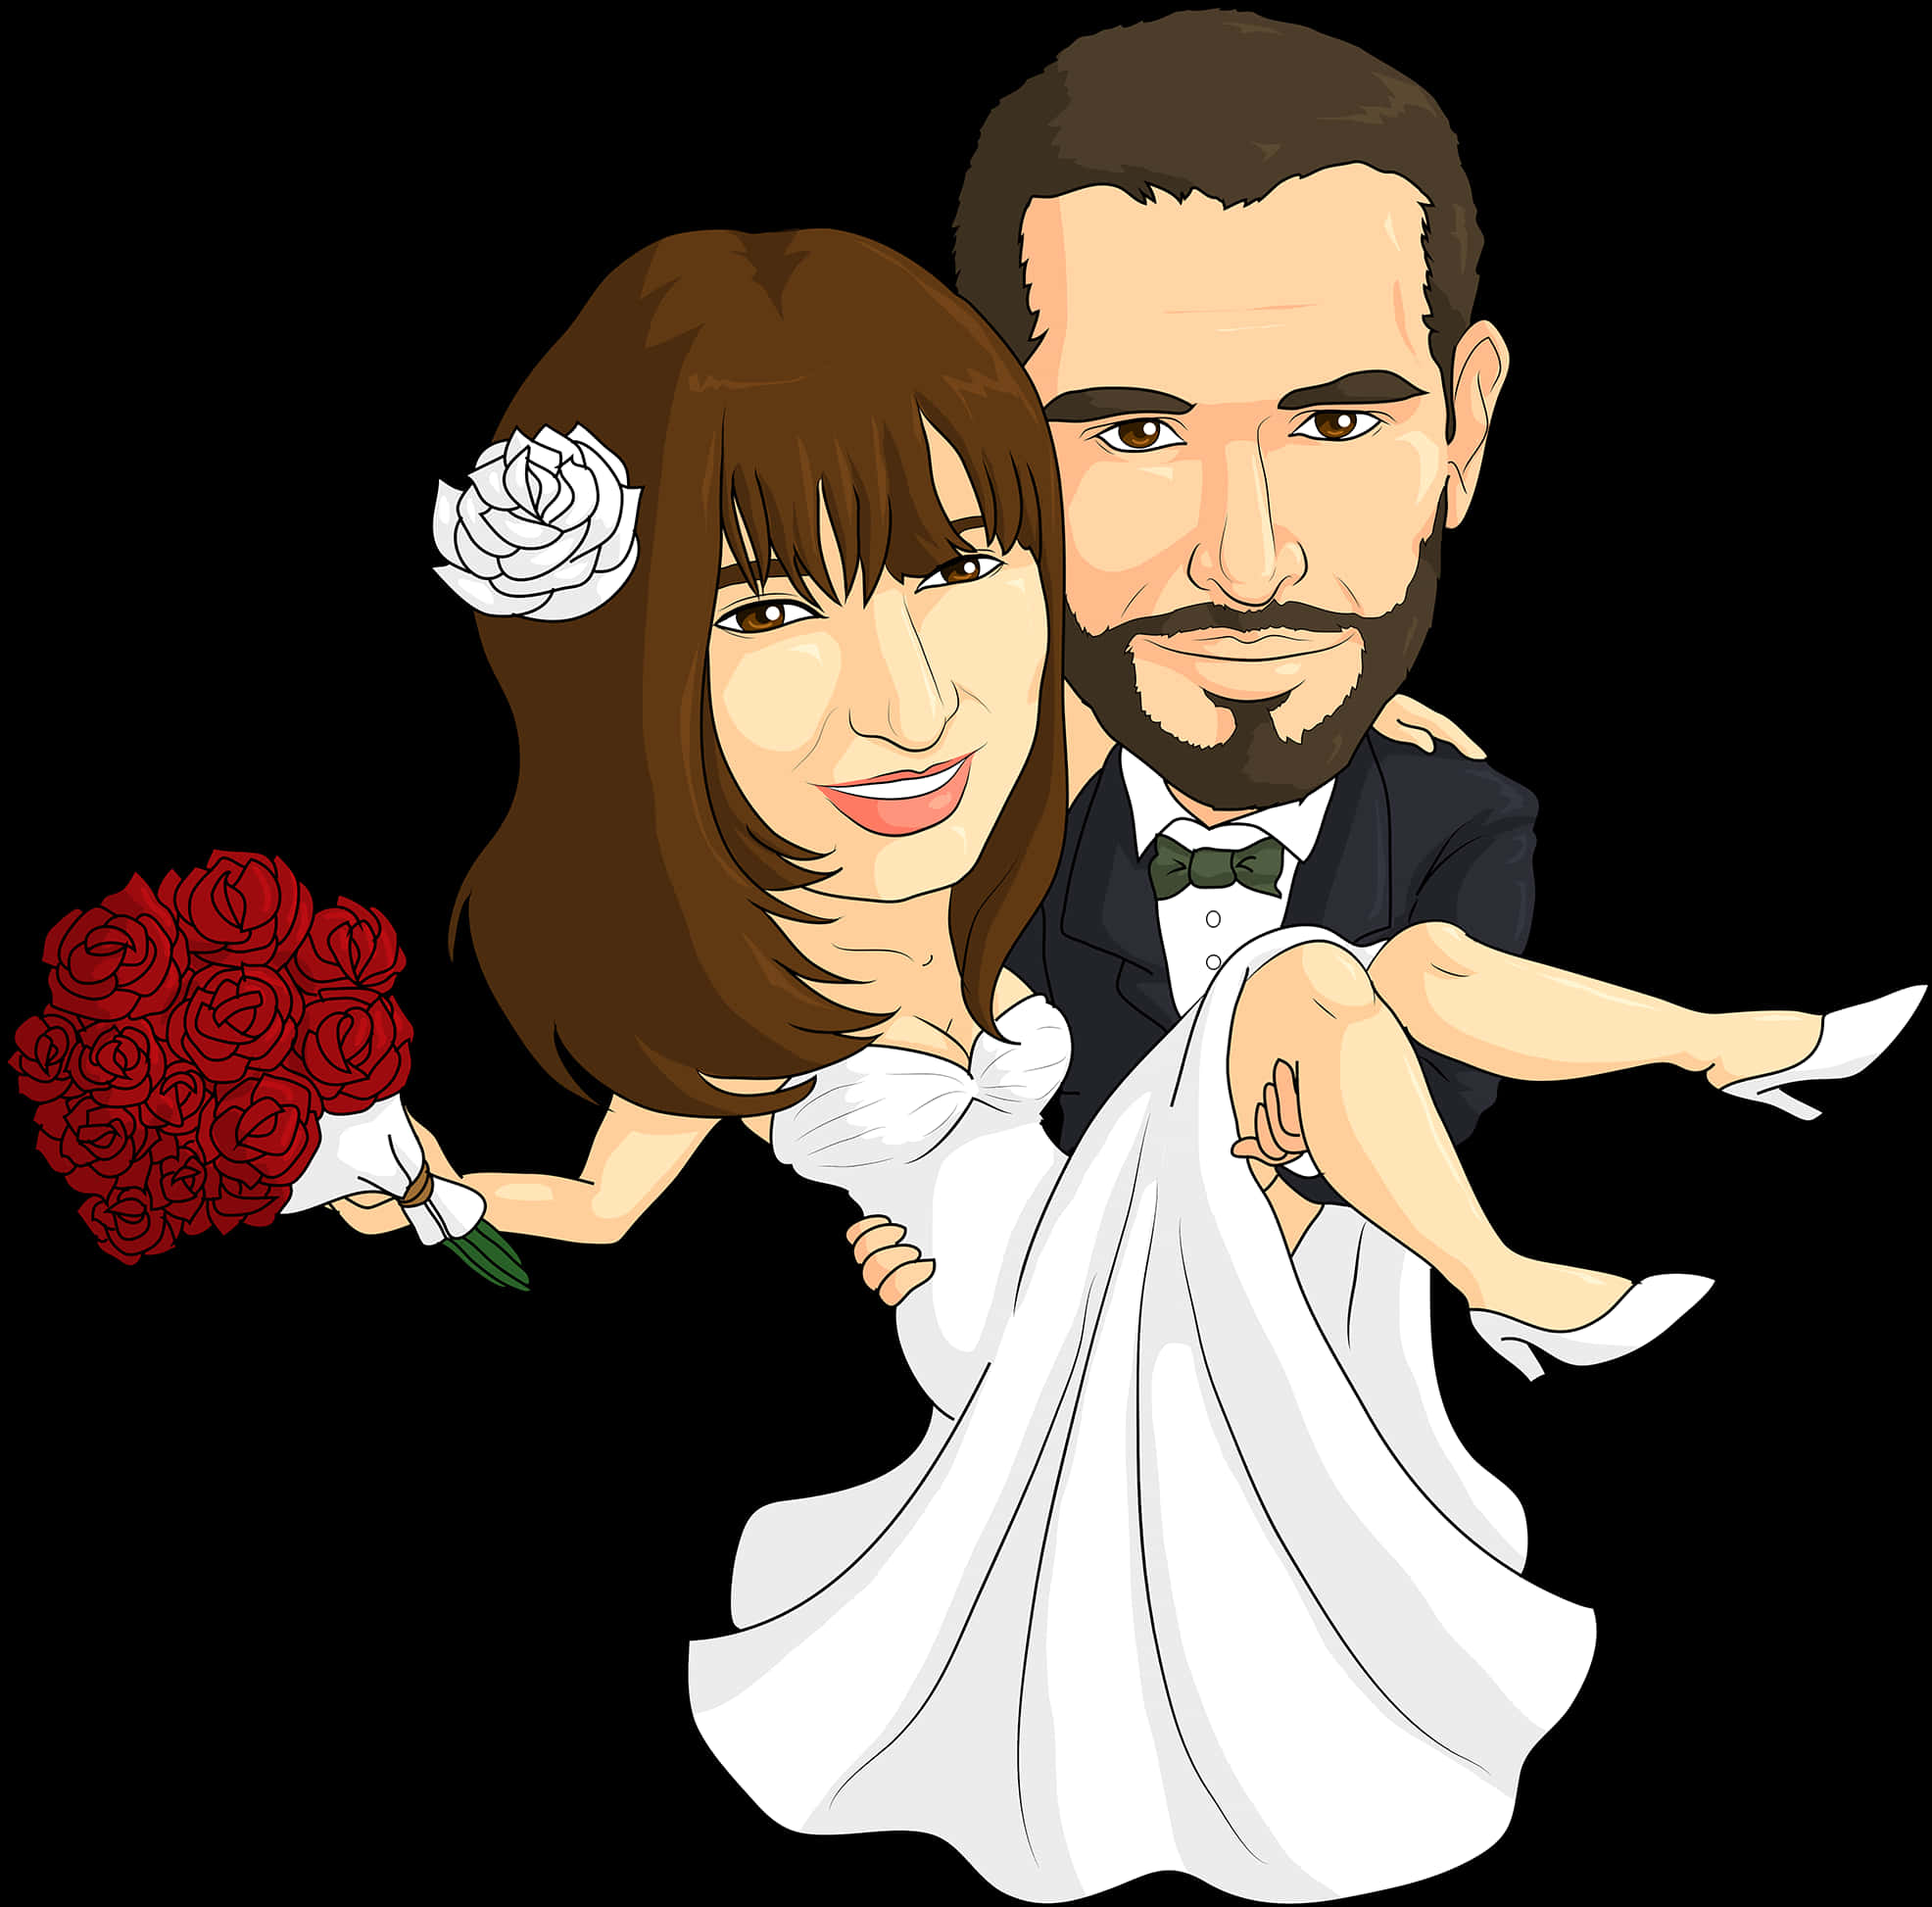 A Cartoon Of A Man And Woman Holding Flowers